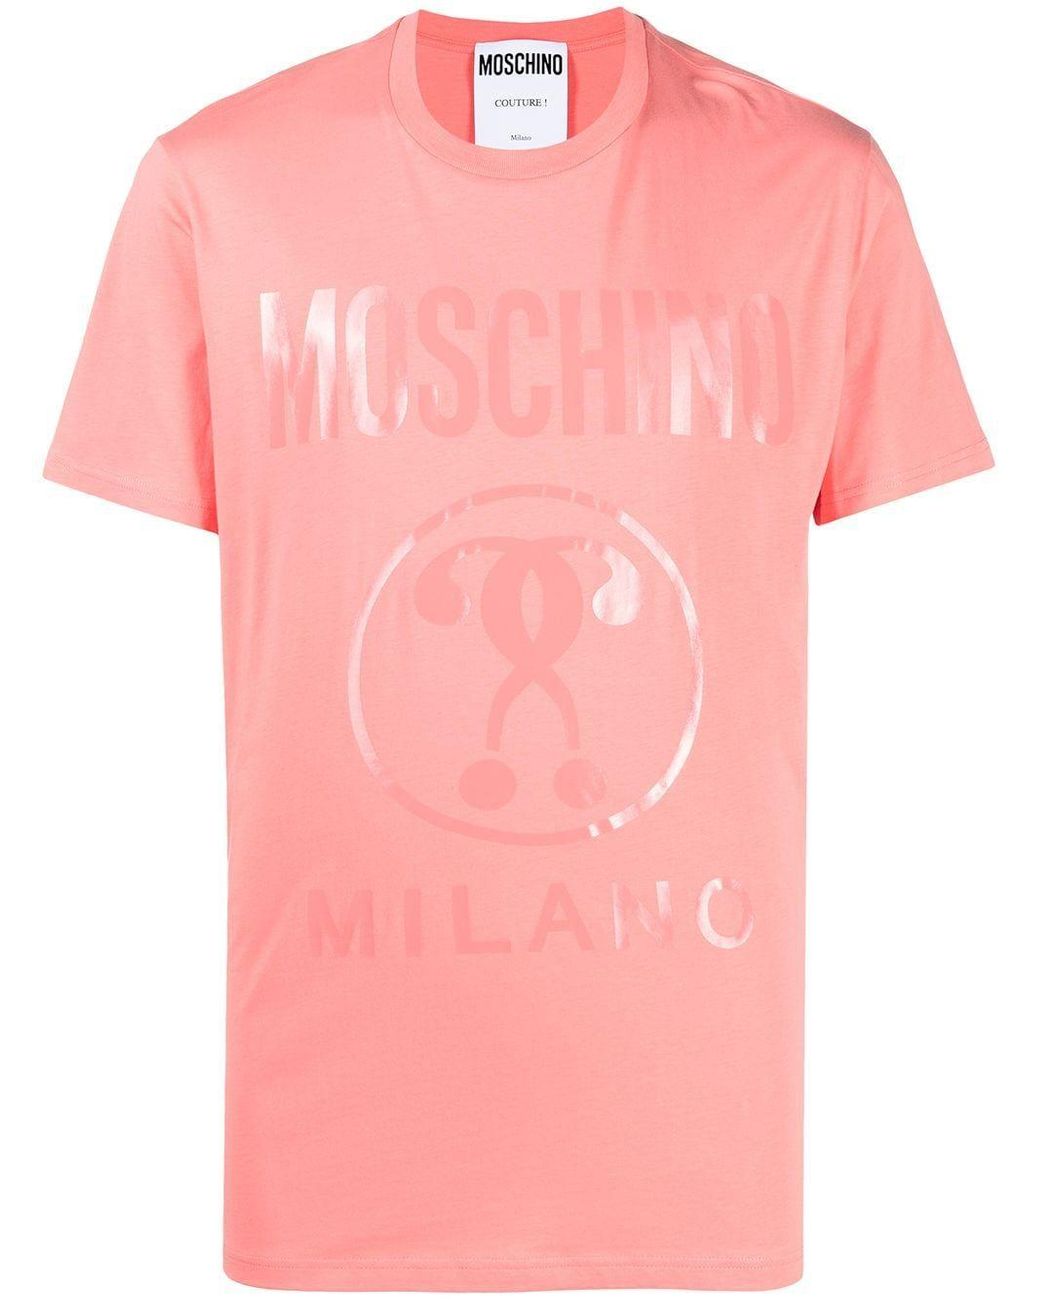 Moschino Cotton T-shirt in Pink for Men - Lyst